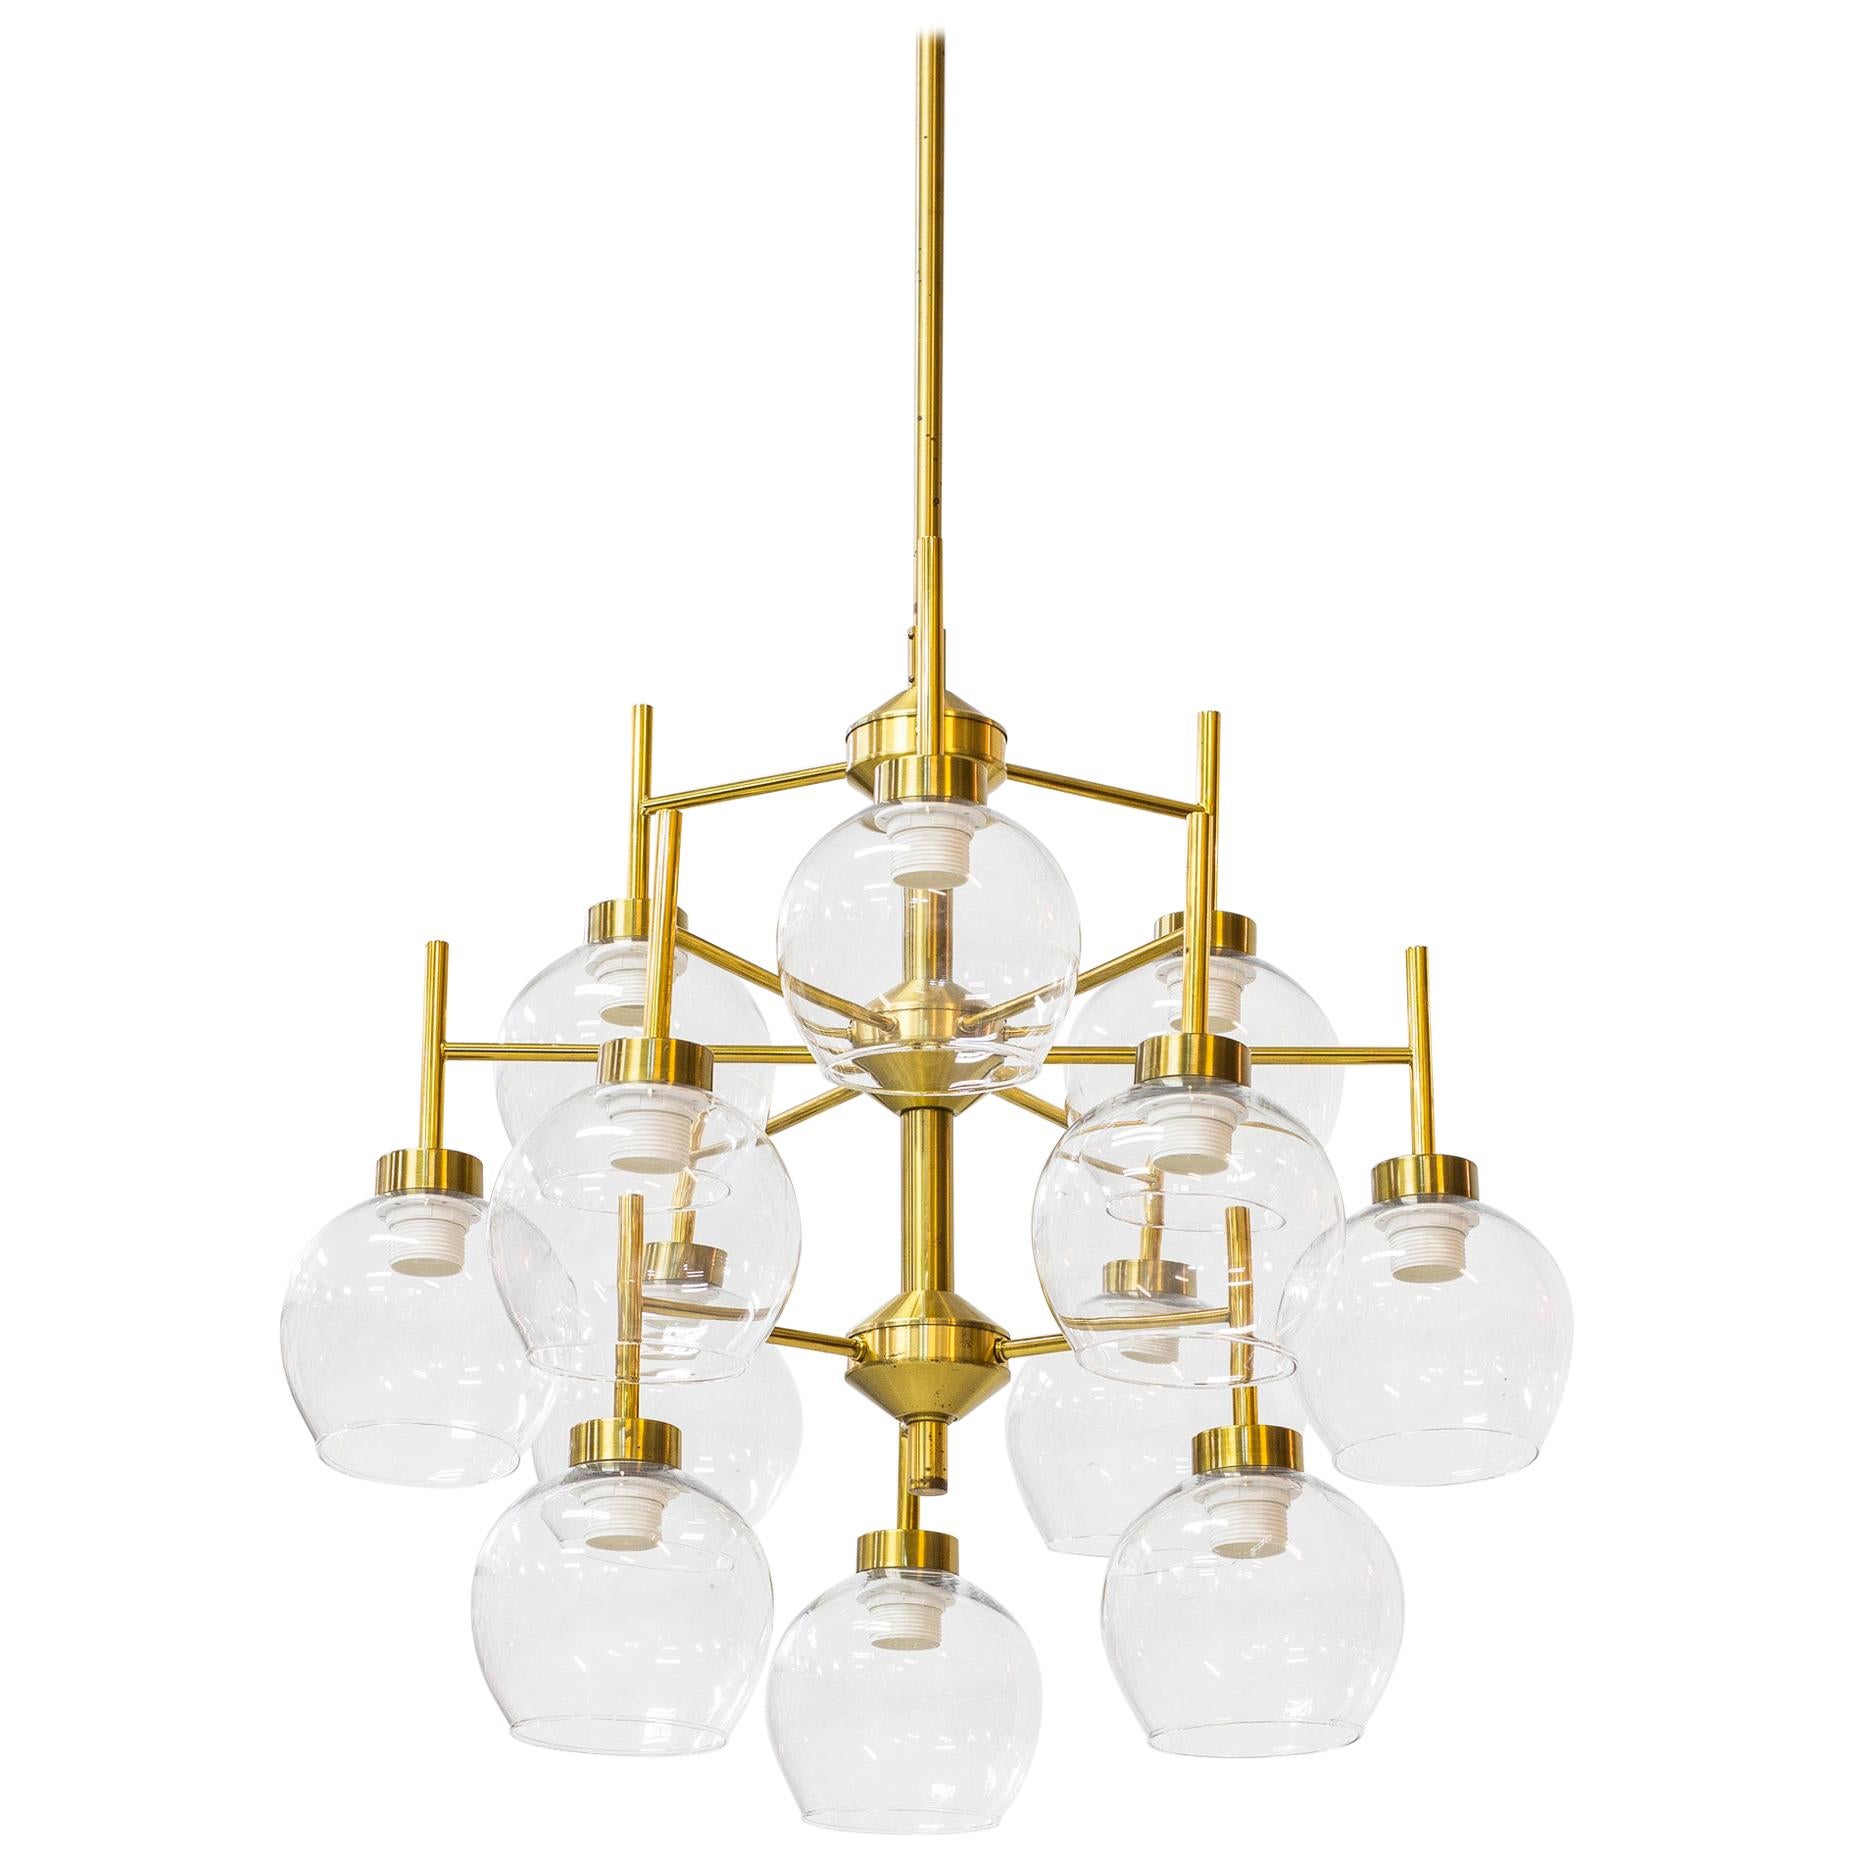 Brass and Glass Chandeliers by Holger Johansson for Westal, Sweden, 1960s 